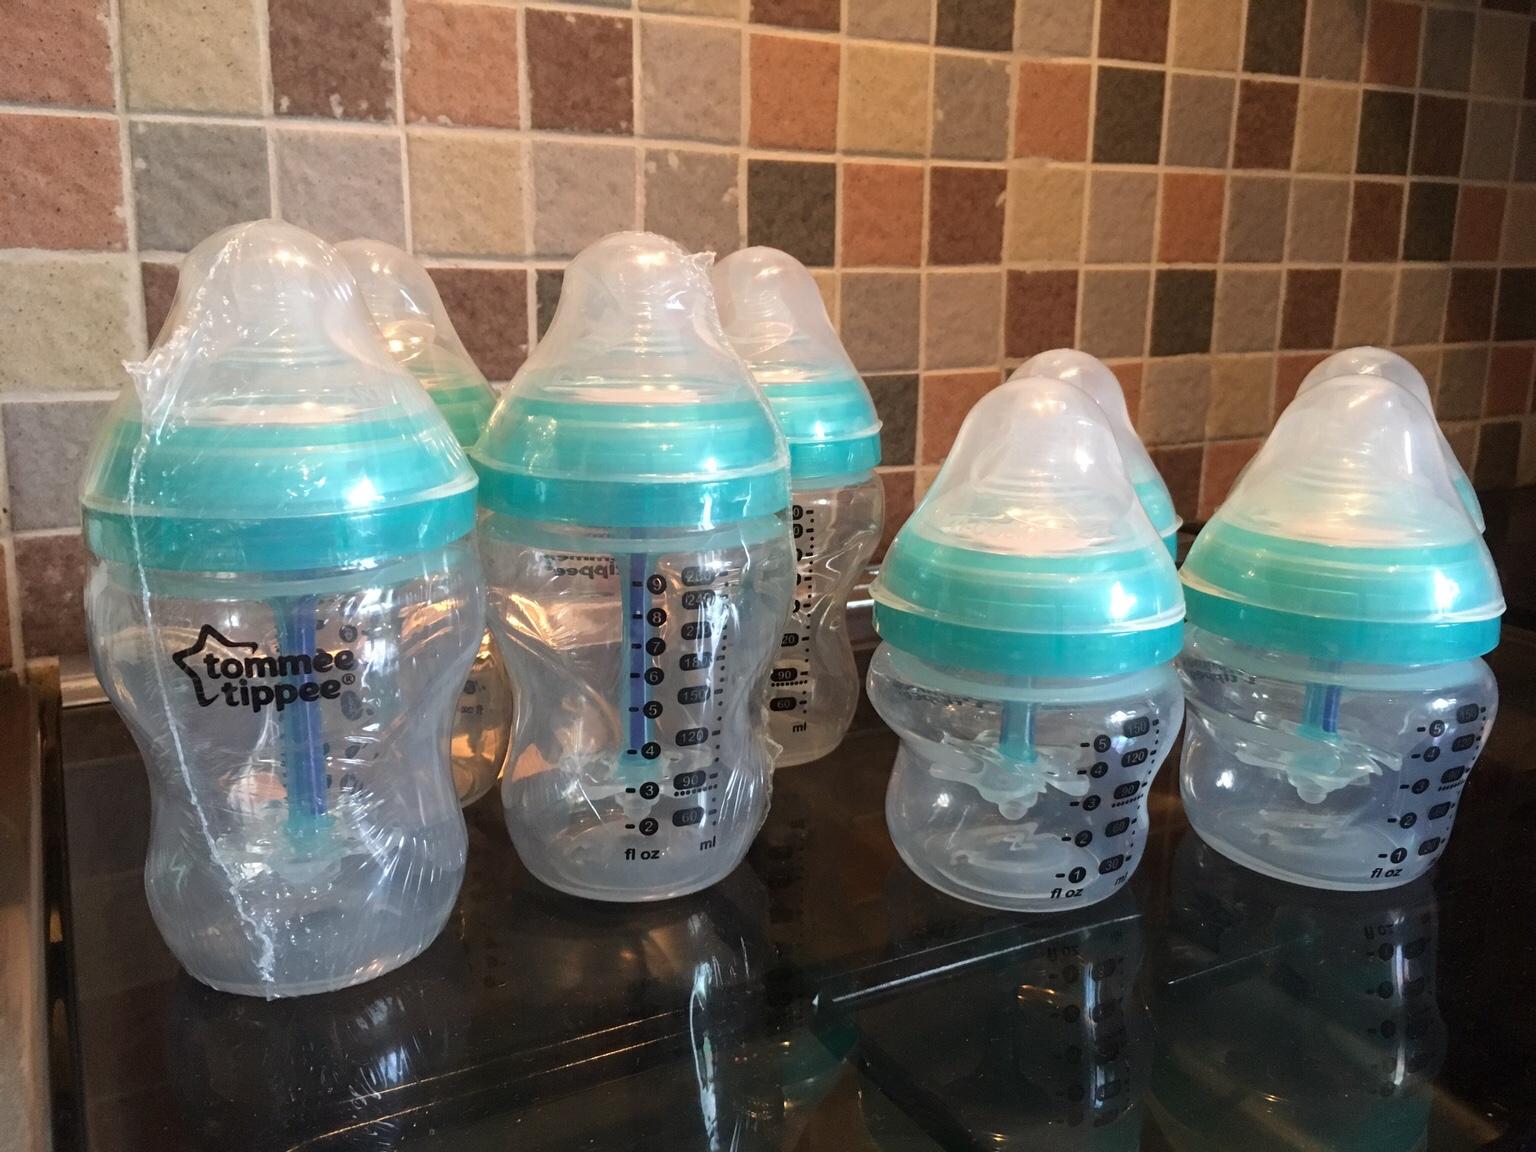 tommee tippee advanced anti colic bottles